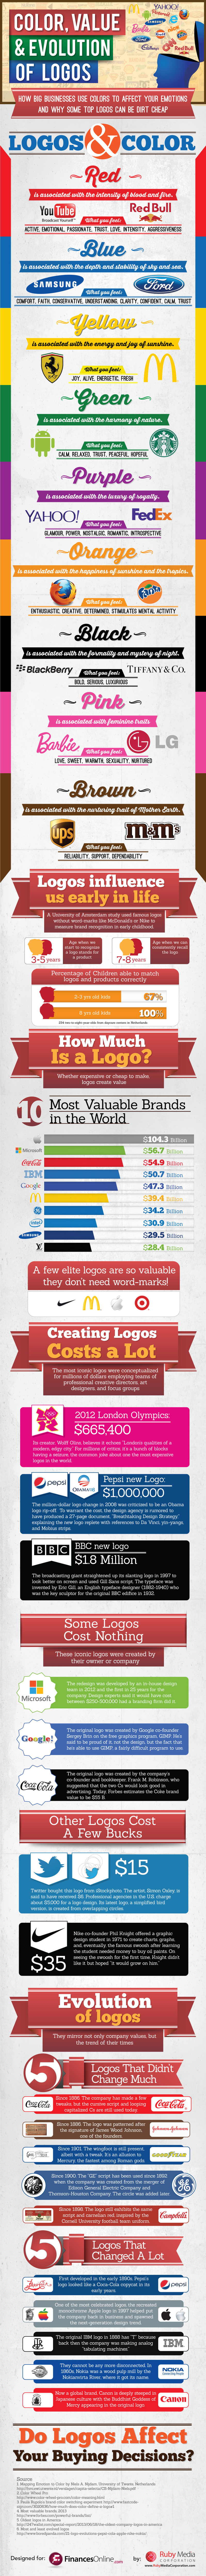 1395420147-what-does-color-logo-say-about-business-infographic